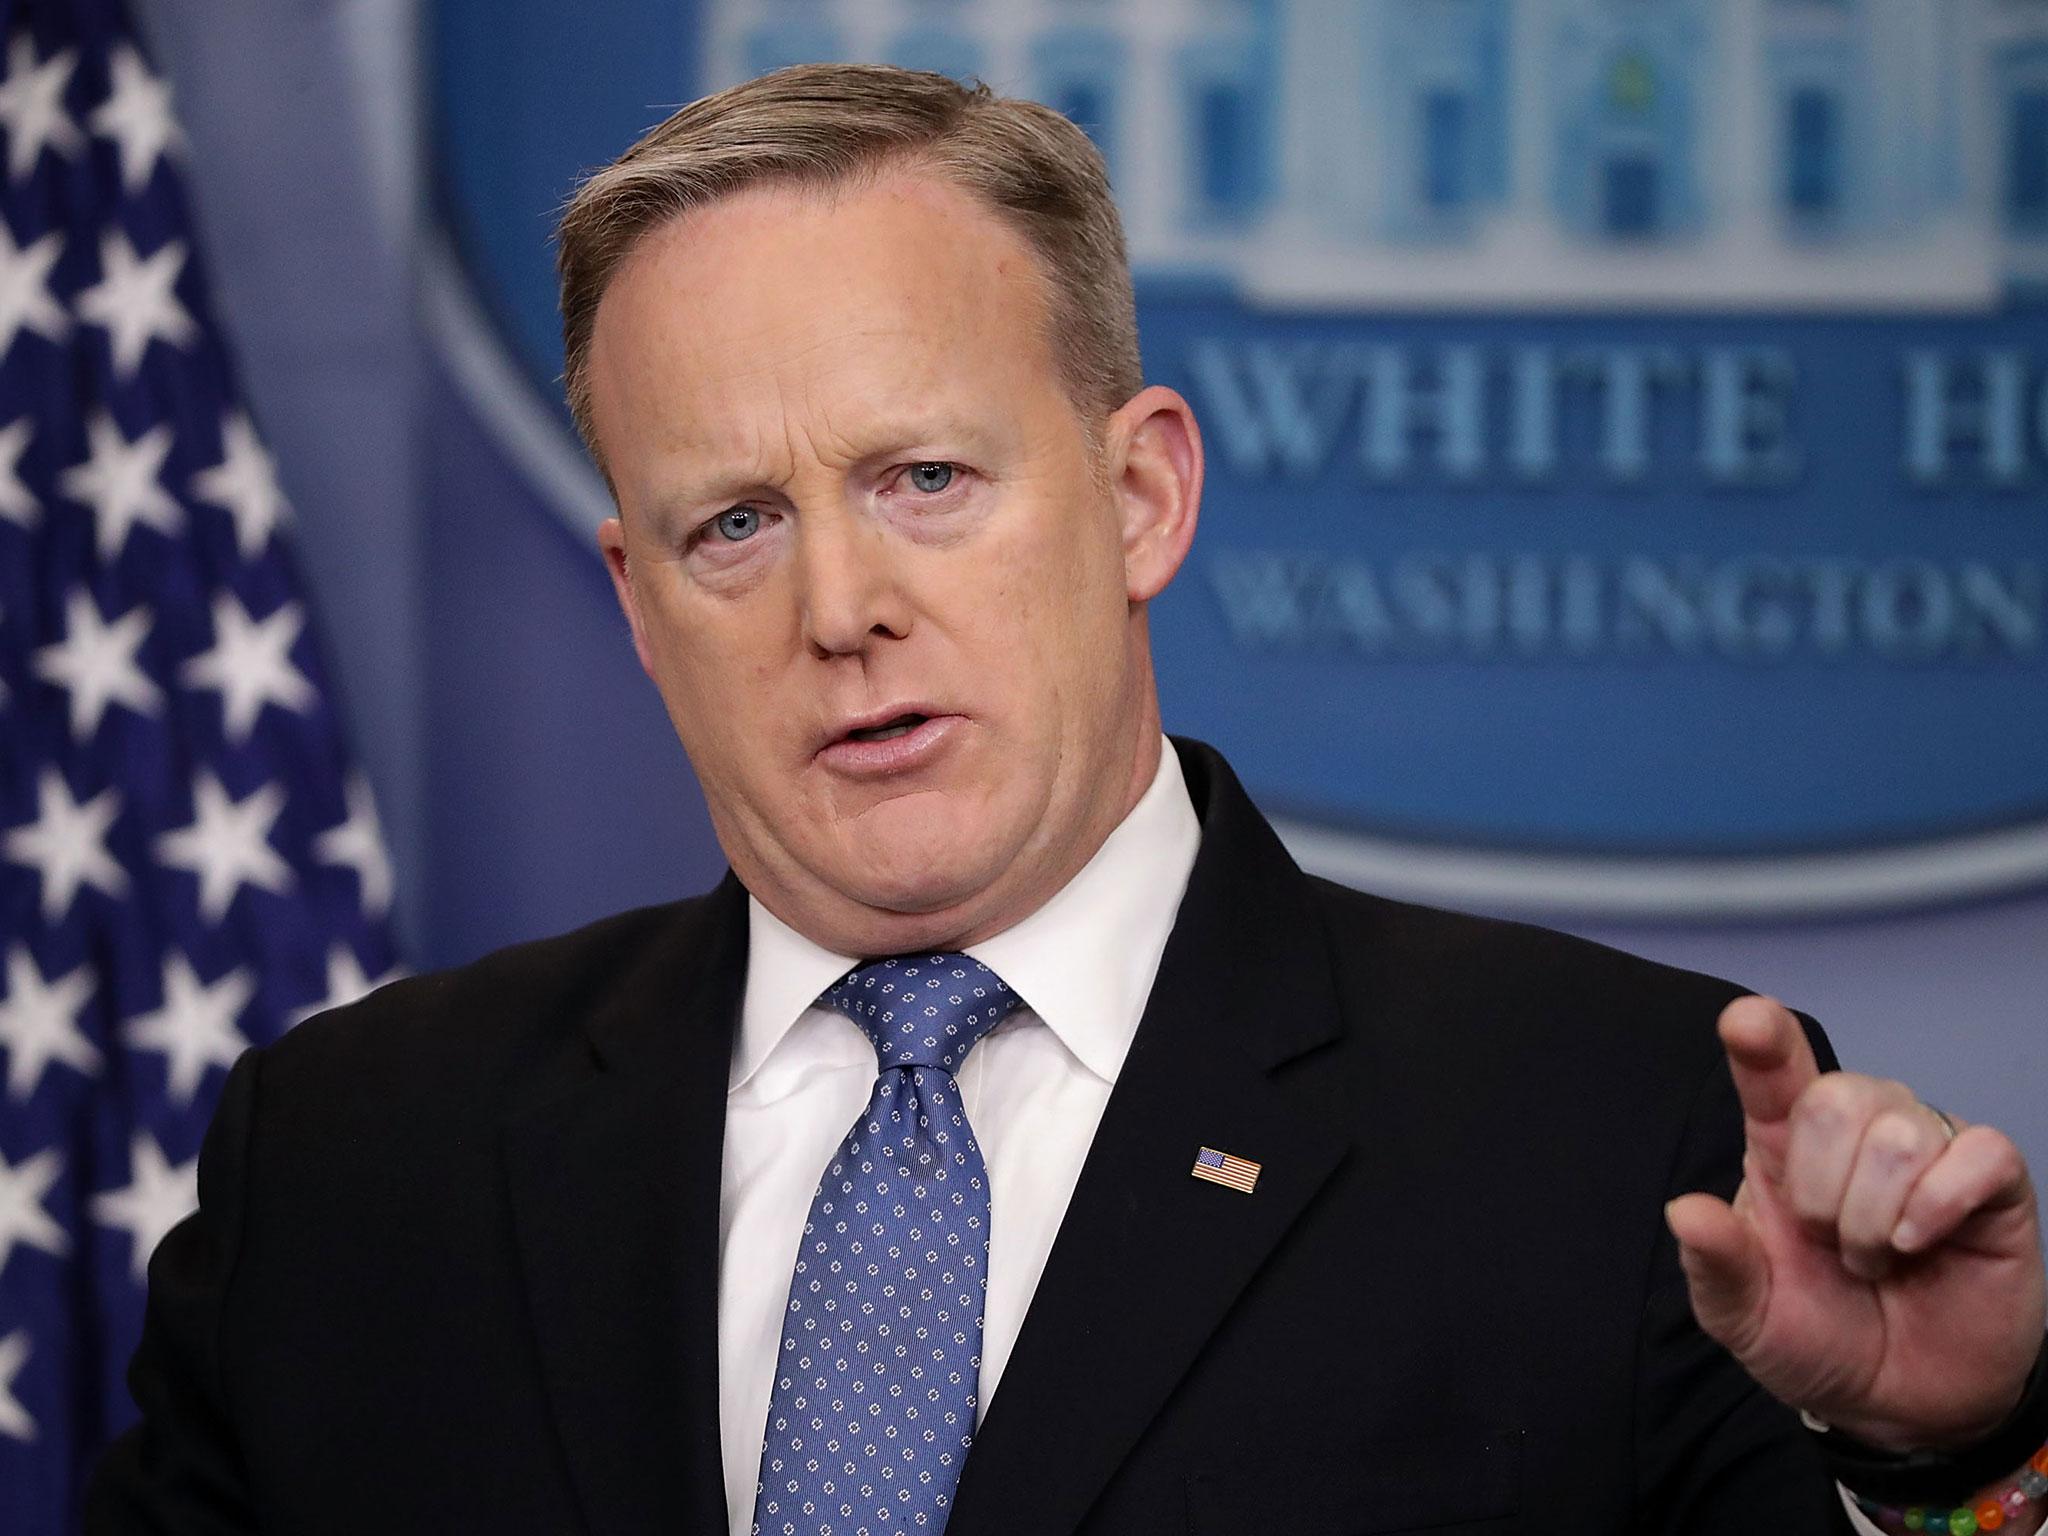 Sean Spicer said colleague Jessica Ditt was upset about the Navy Seal's death